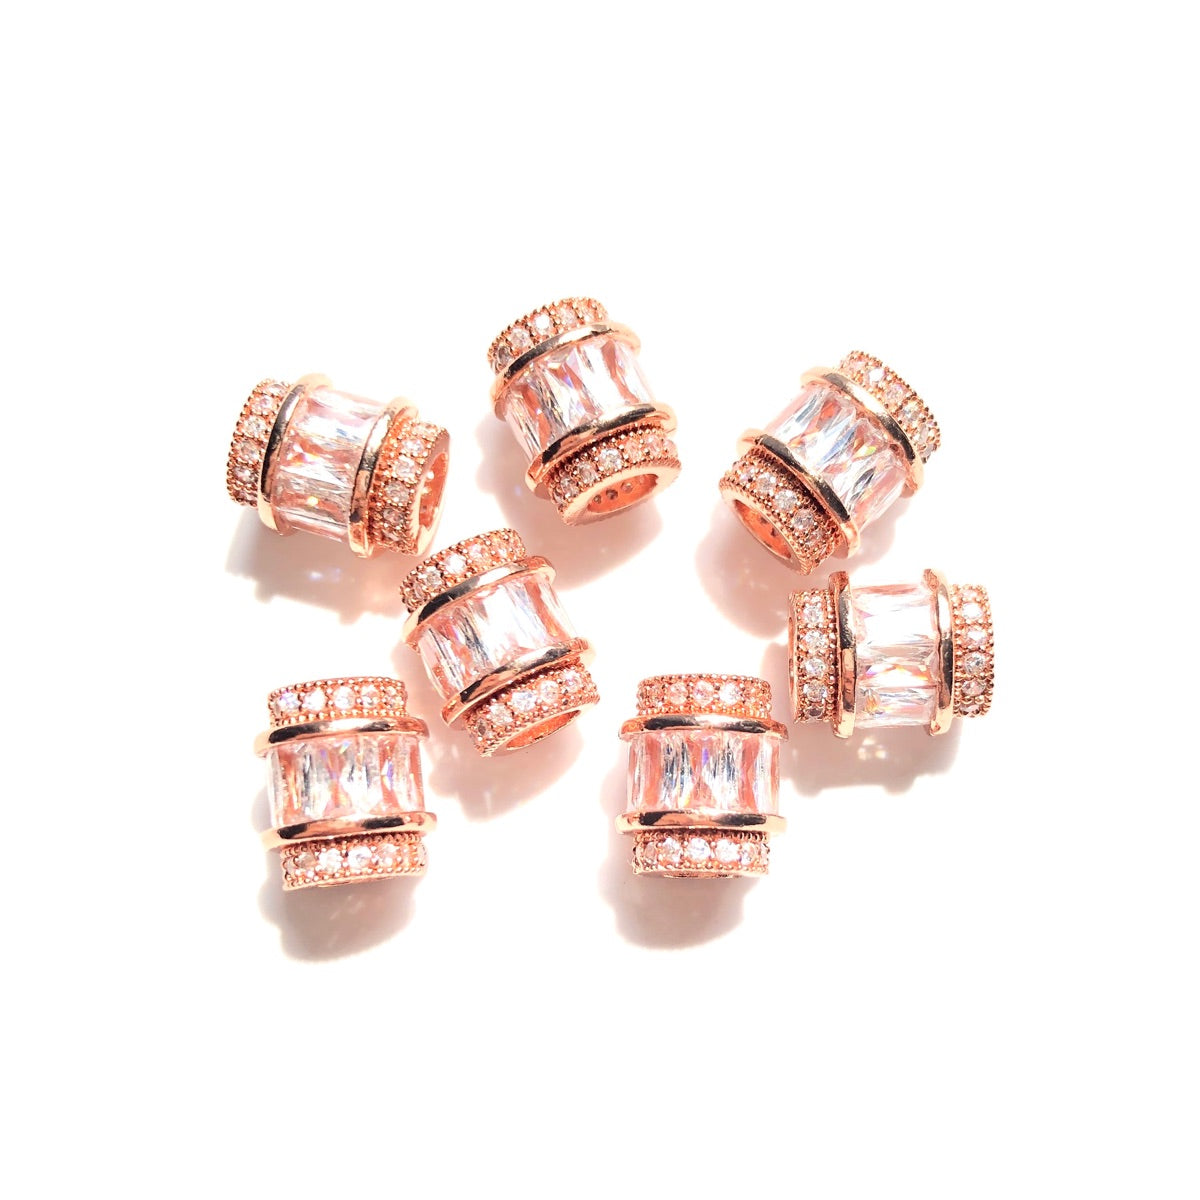 10pcs/lot 9.6/12mm Clear CZ Paved Big Hole Spacers Rose Gold CZ Paved Spacers Big Hole Beads New Spacers Arrivals Charms Beads Beyond